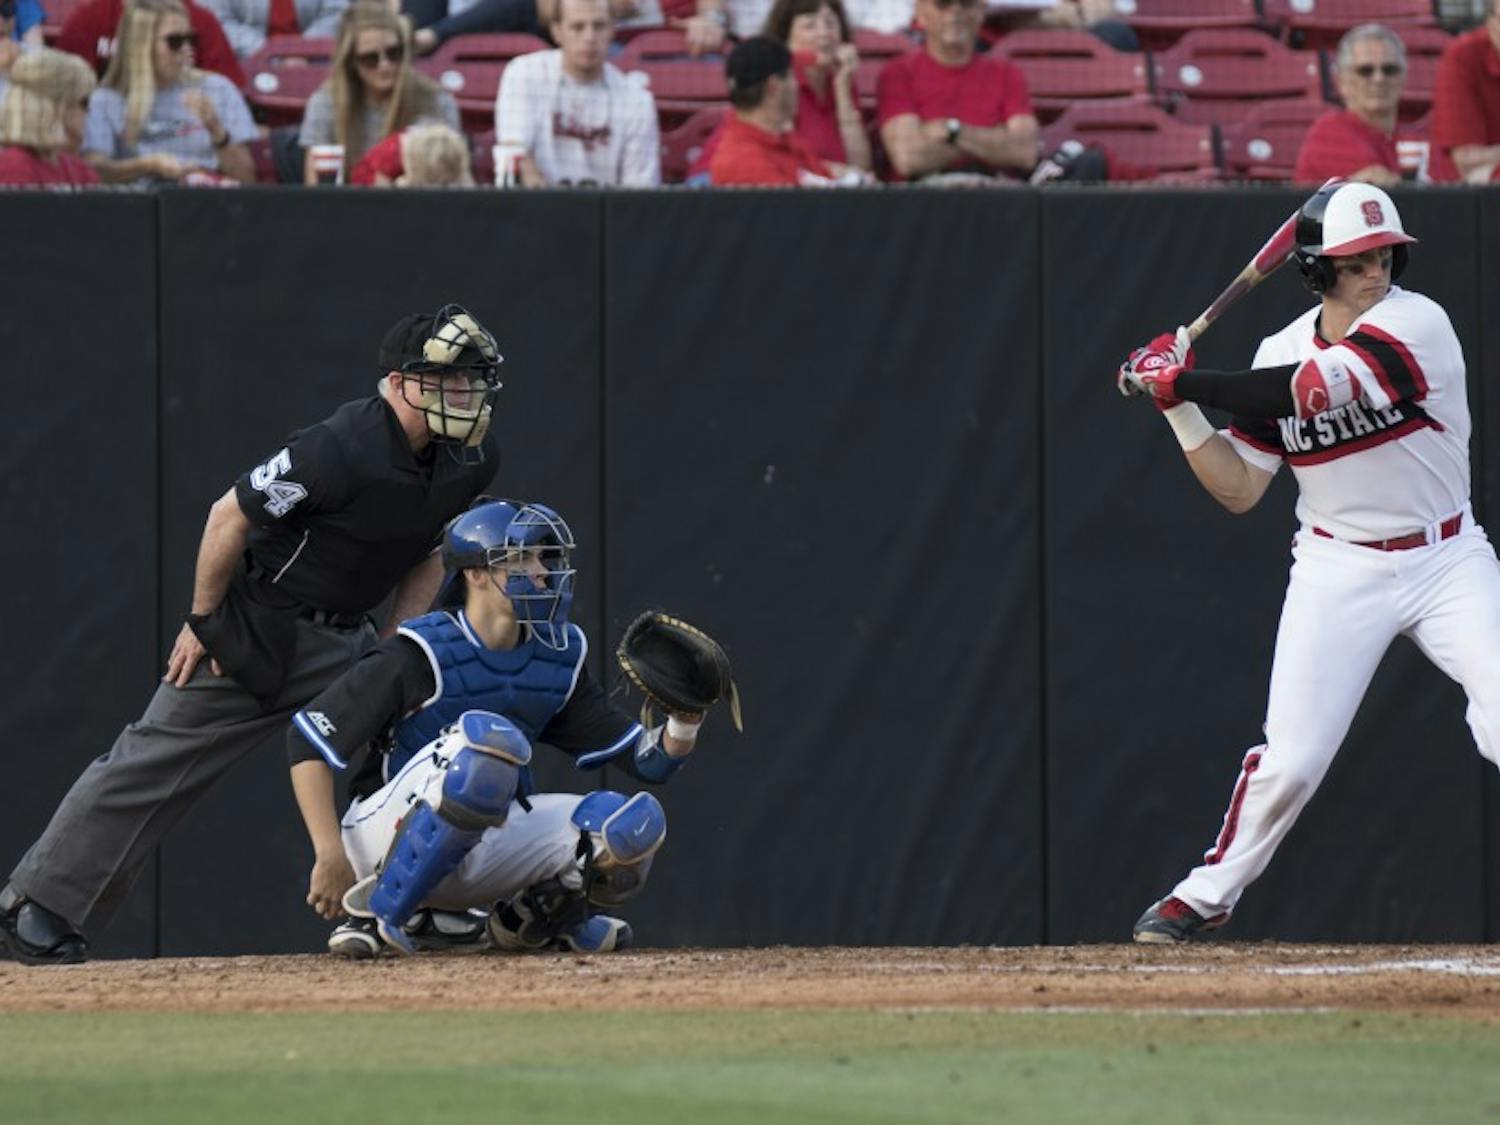 N.C. State exploded for 12 runs Saturday after a seven-run fifth inning which was aided by multiple Duke fielding errors.